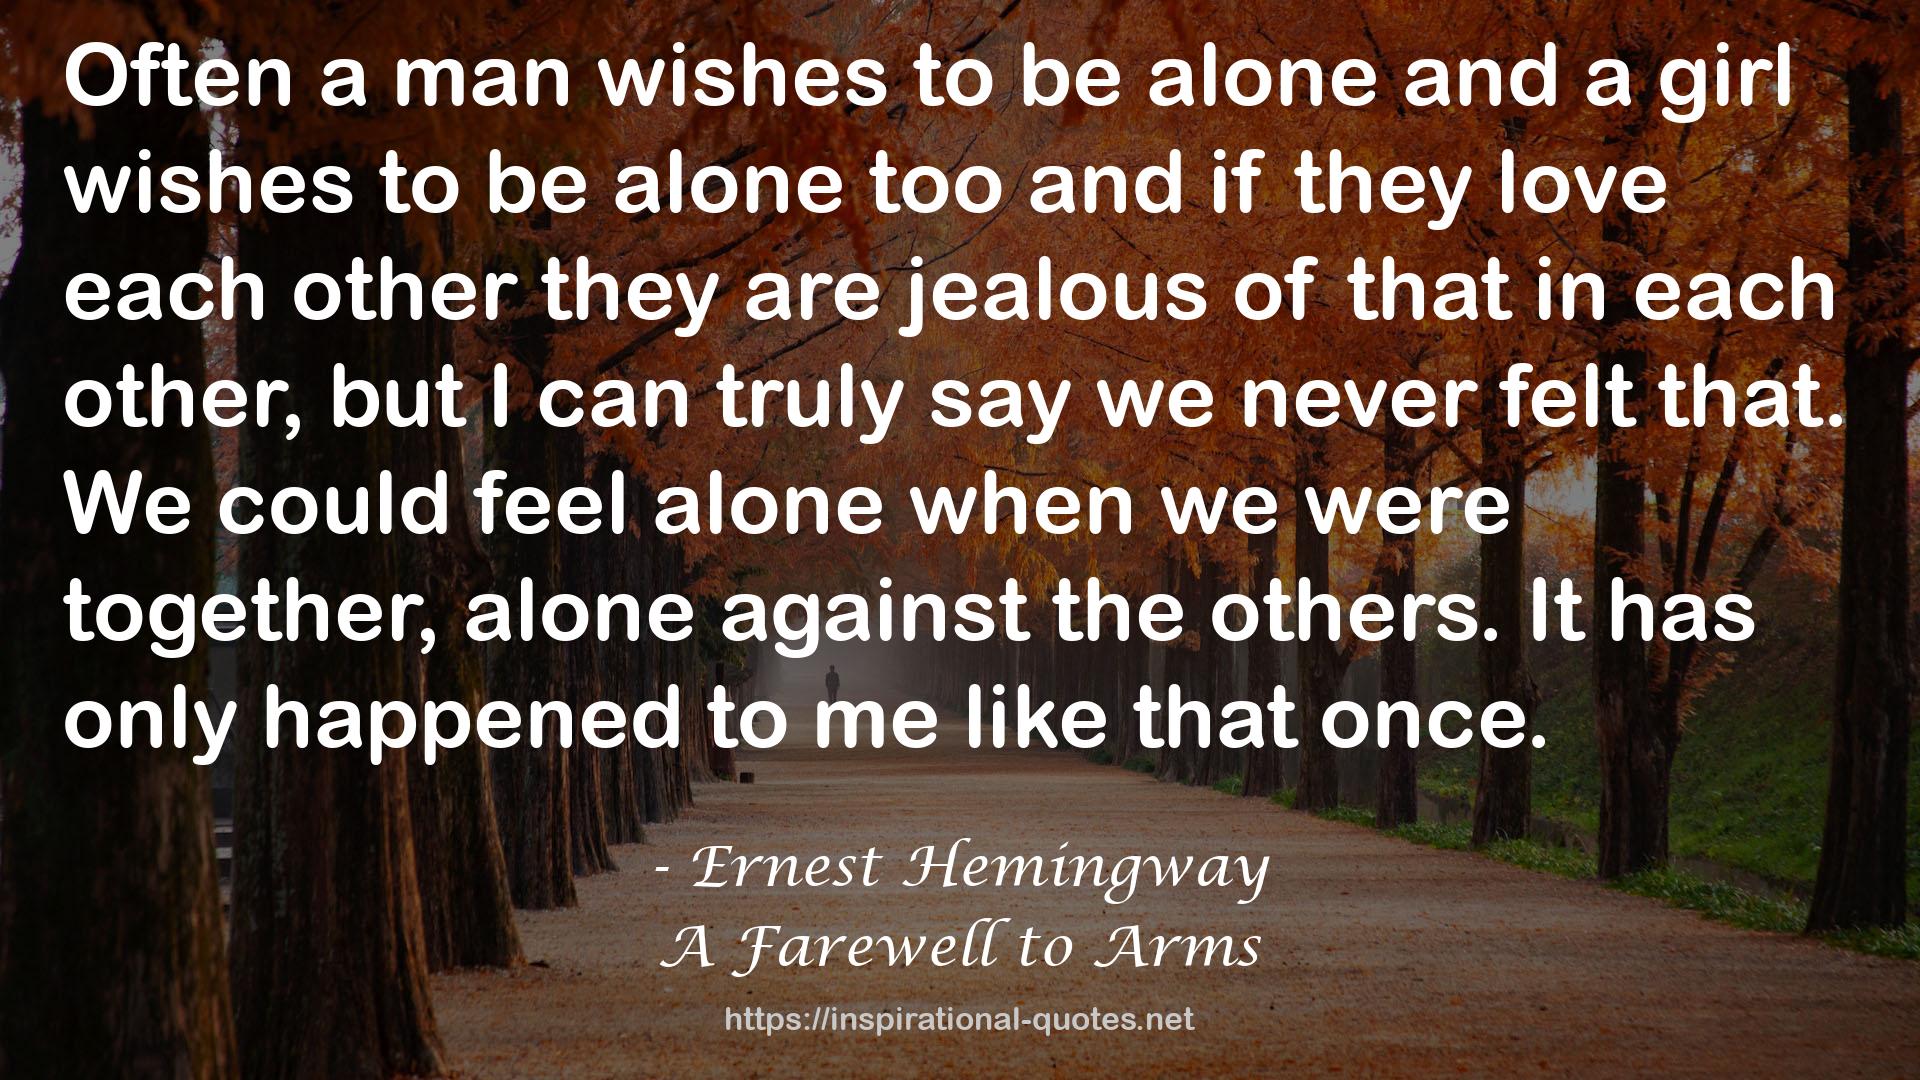 A Farewell to Arms QUOTES